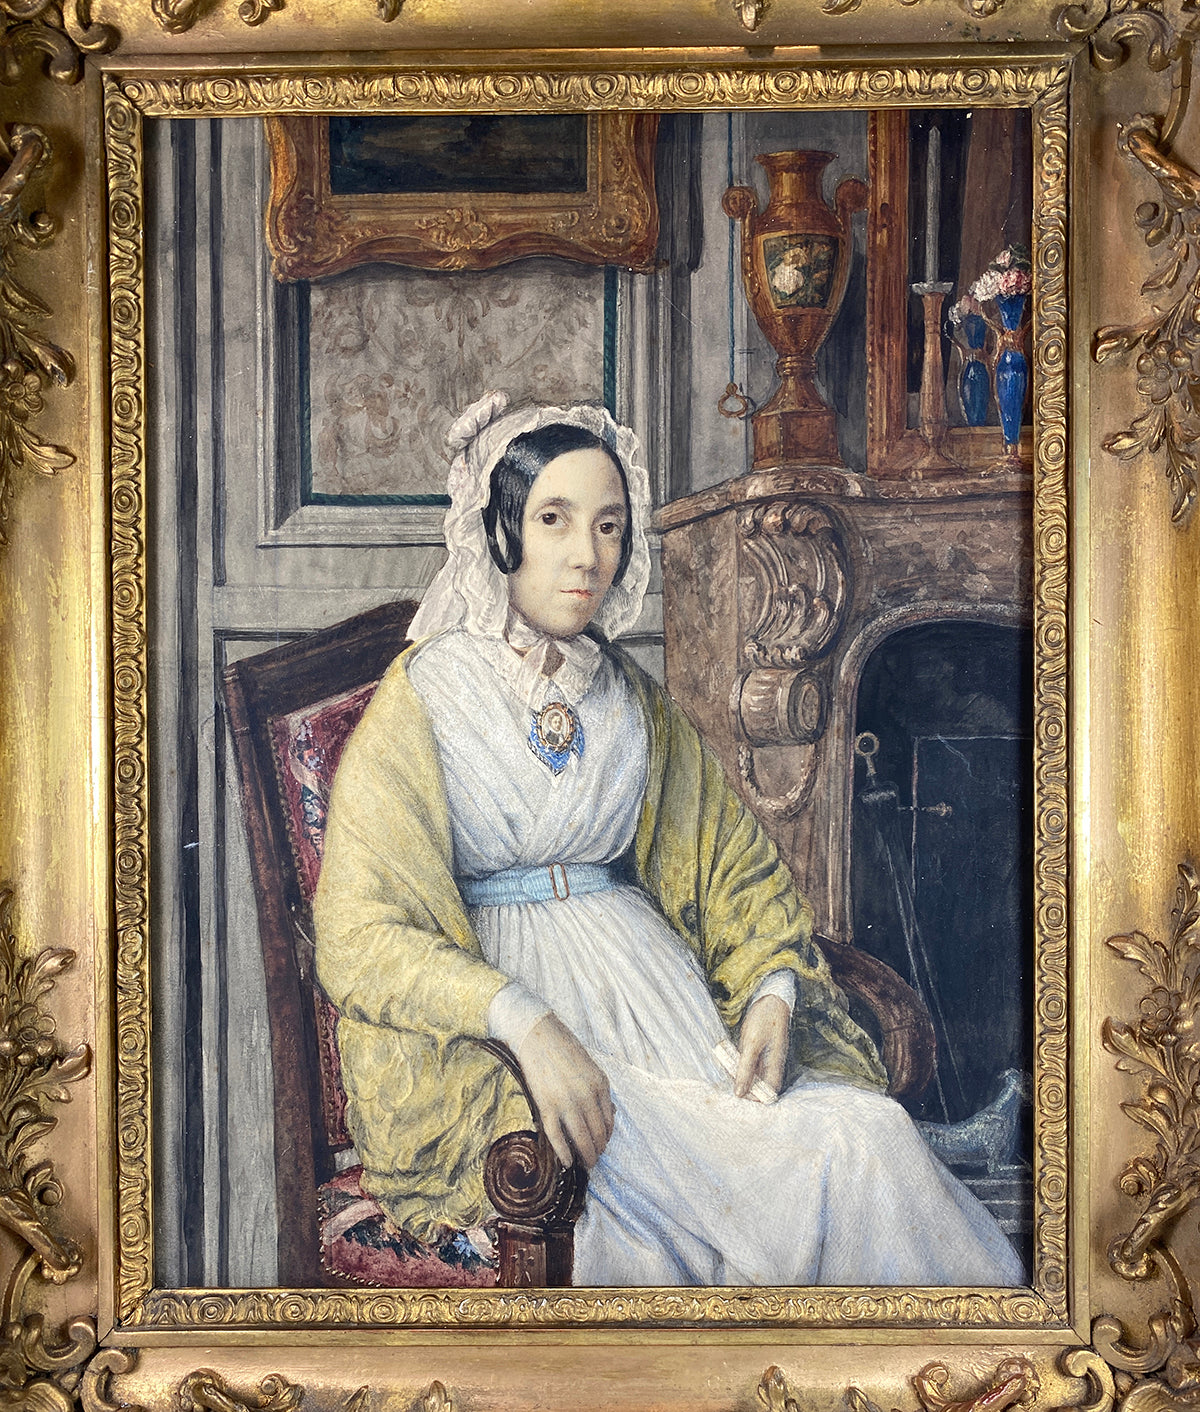 Fine Antique French 18.5" x 15.5" Framed Portrait in Interior, Mother with Miniature of Child, c.1820-30s